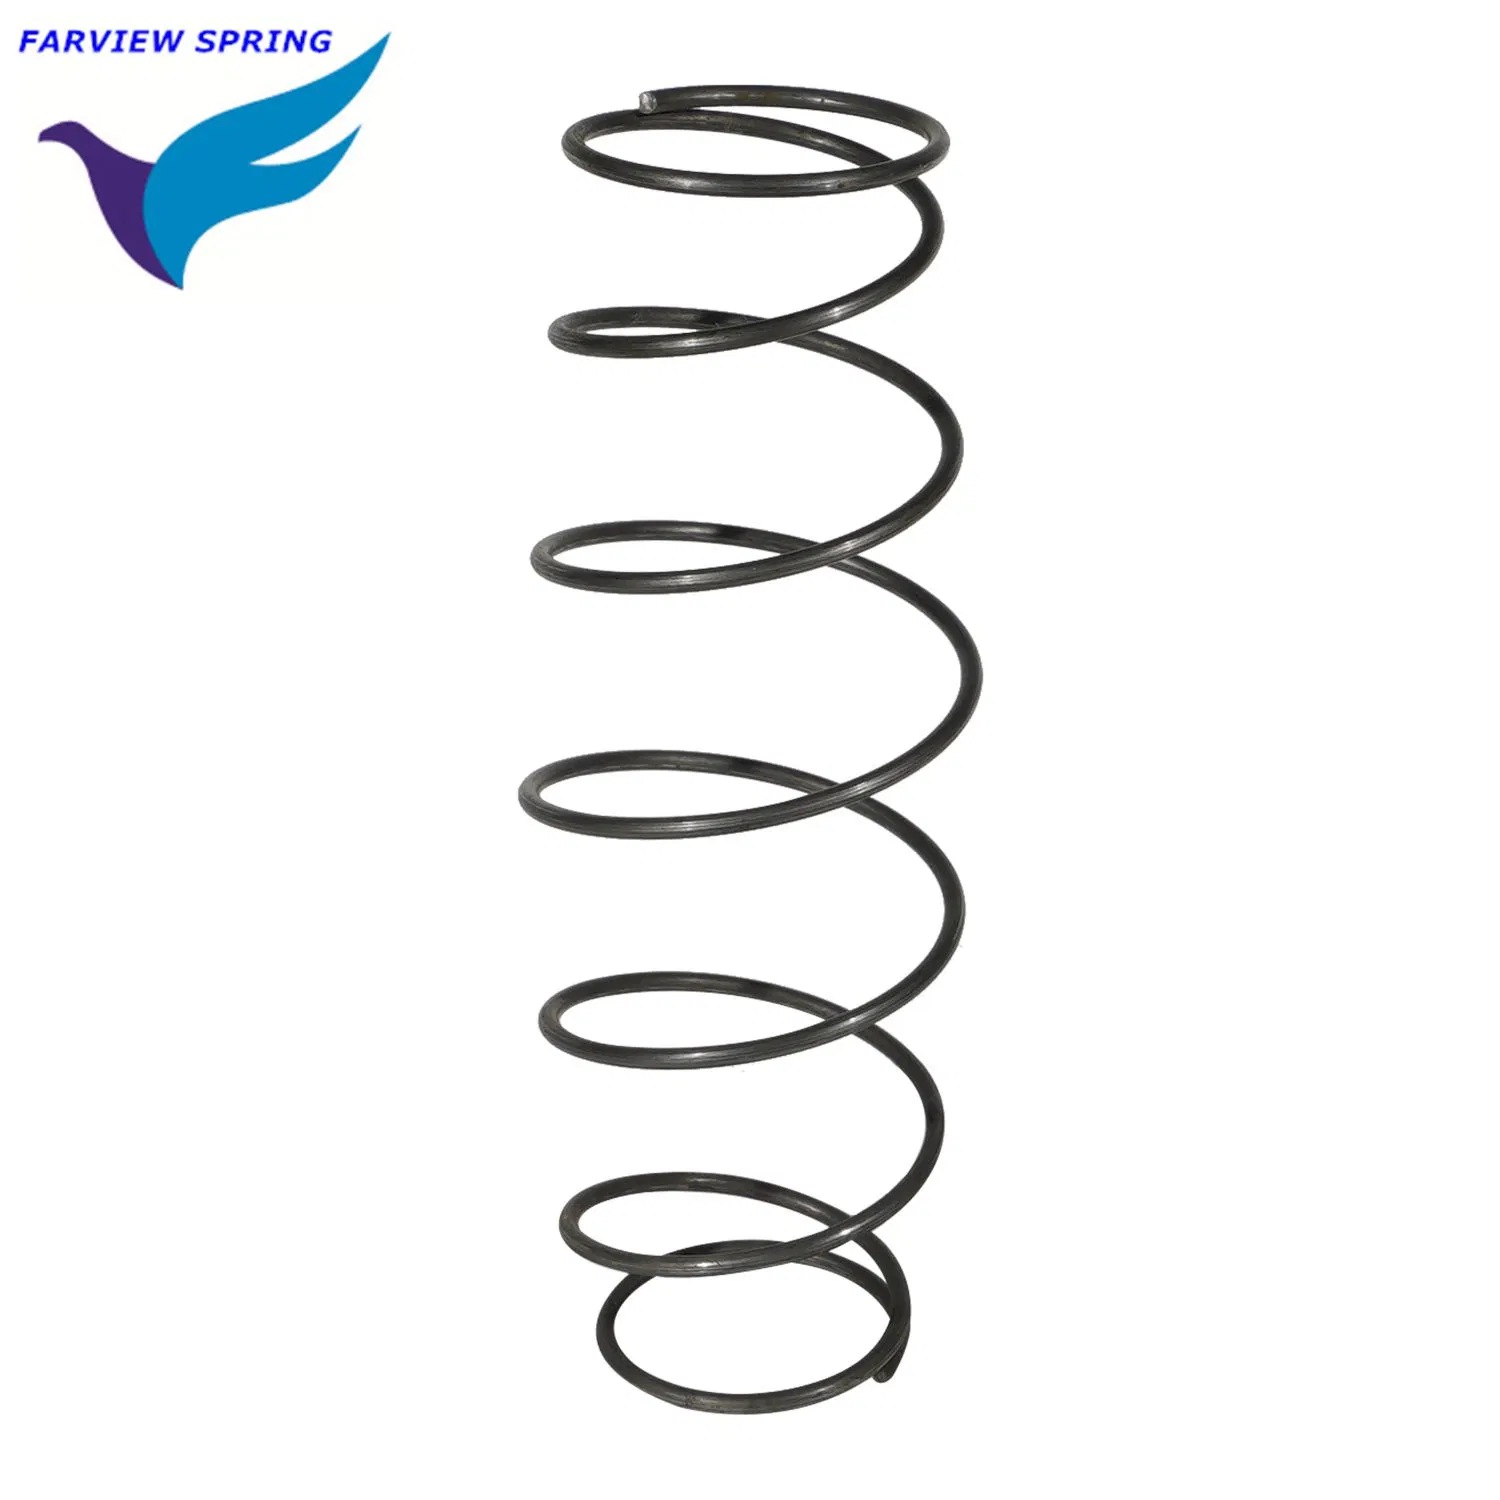 Spare Parts of Combine Harvester Spring Lubrication System Spring Tiny Springs Precision Springs Stainless Steel Springs Compression Springs